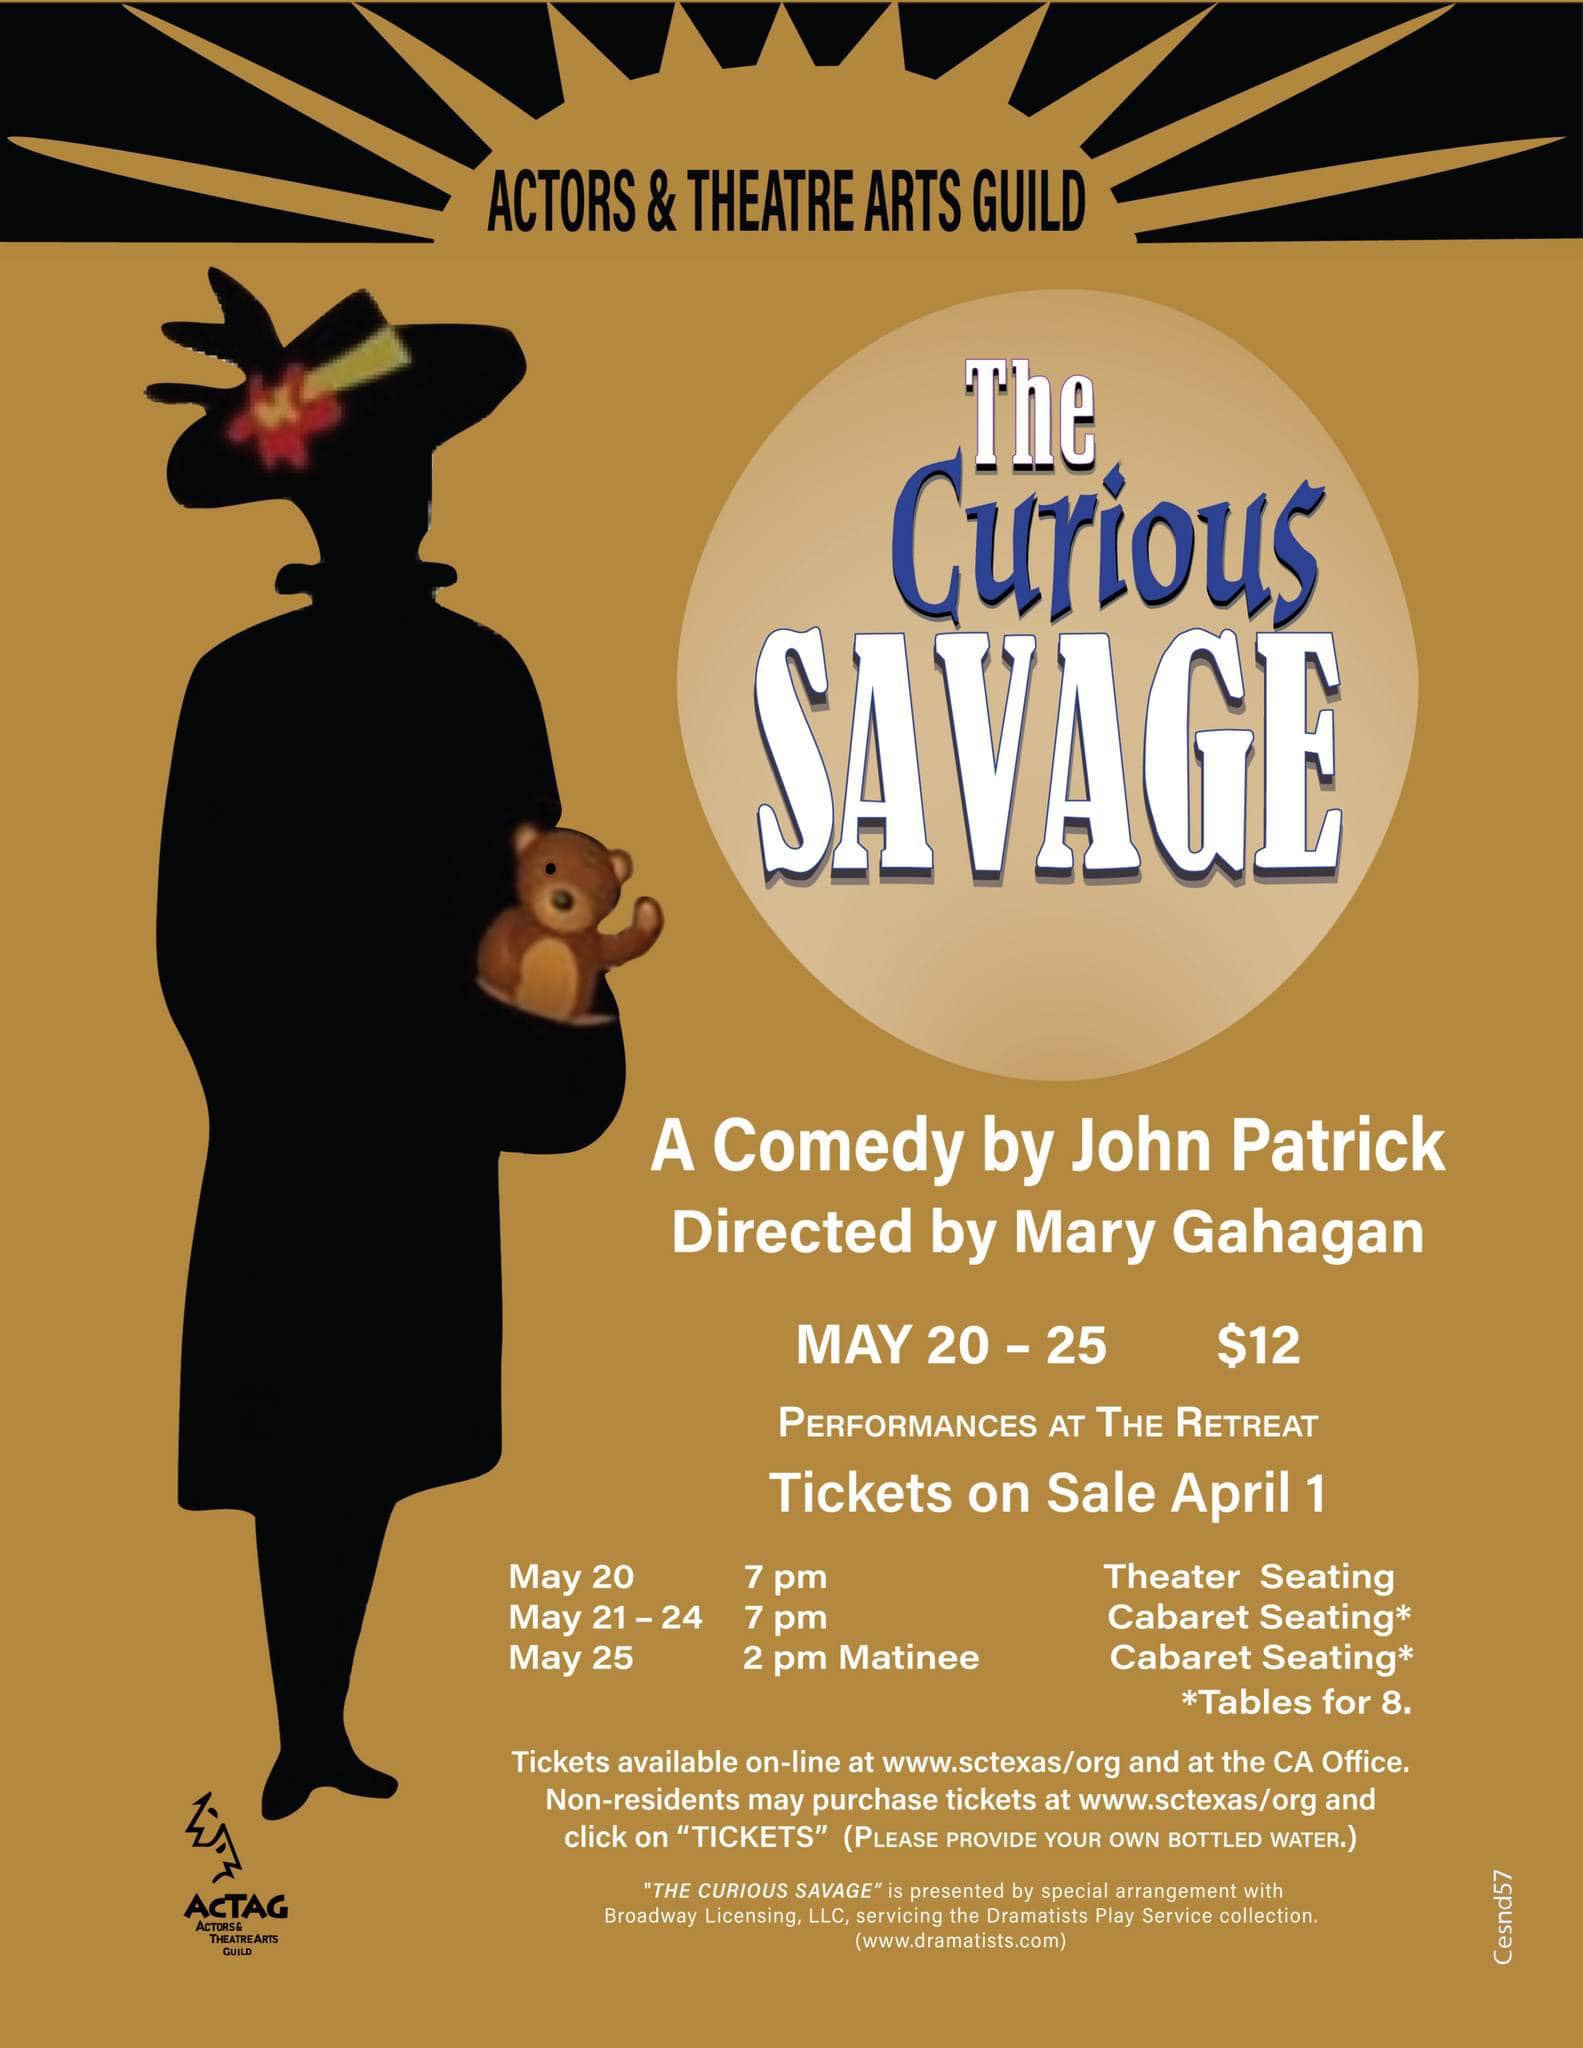 The Curious Savage by Actors and Theatre Arts Guild, Sun City